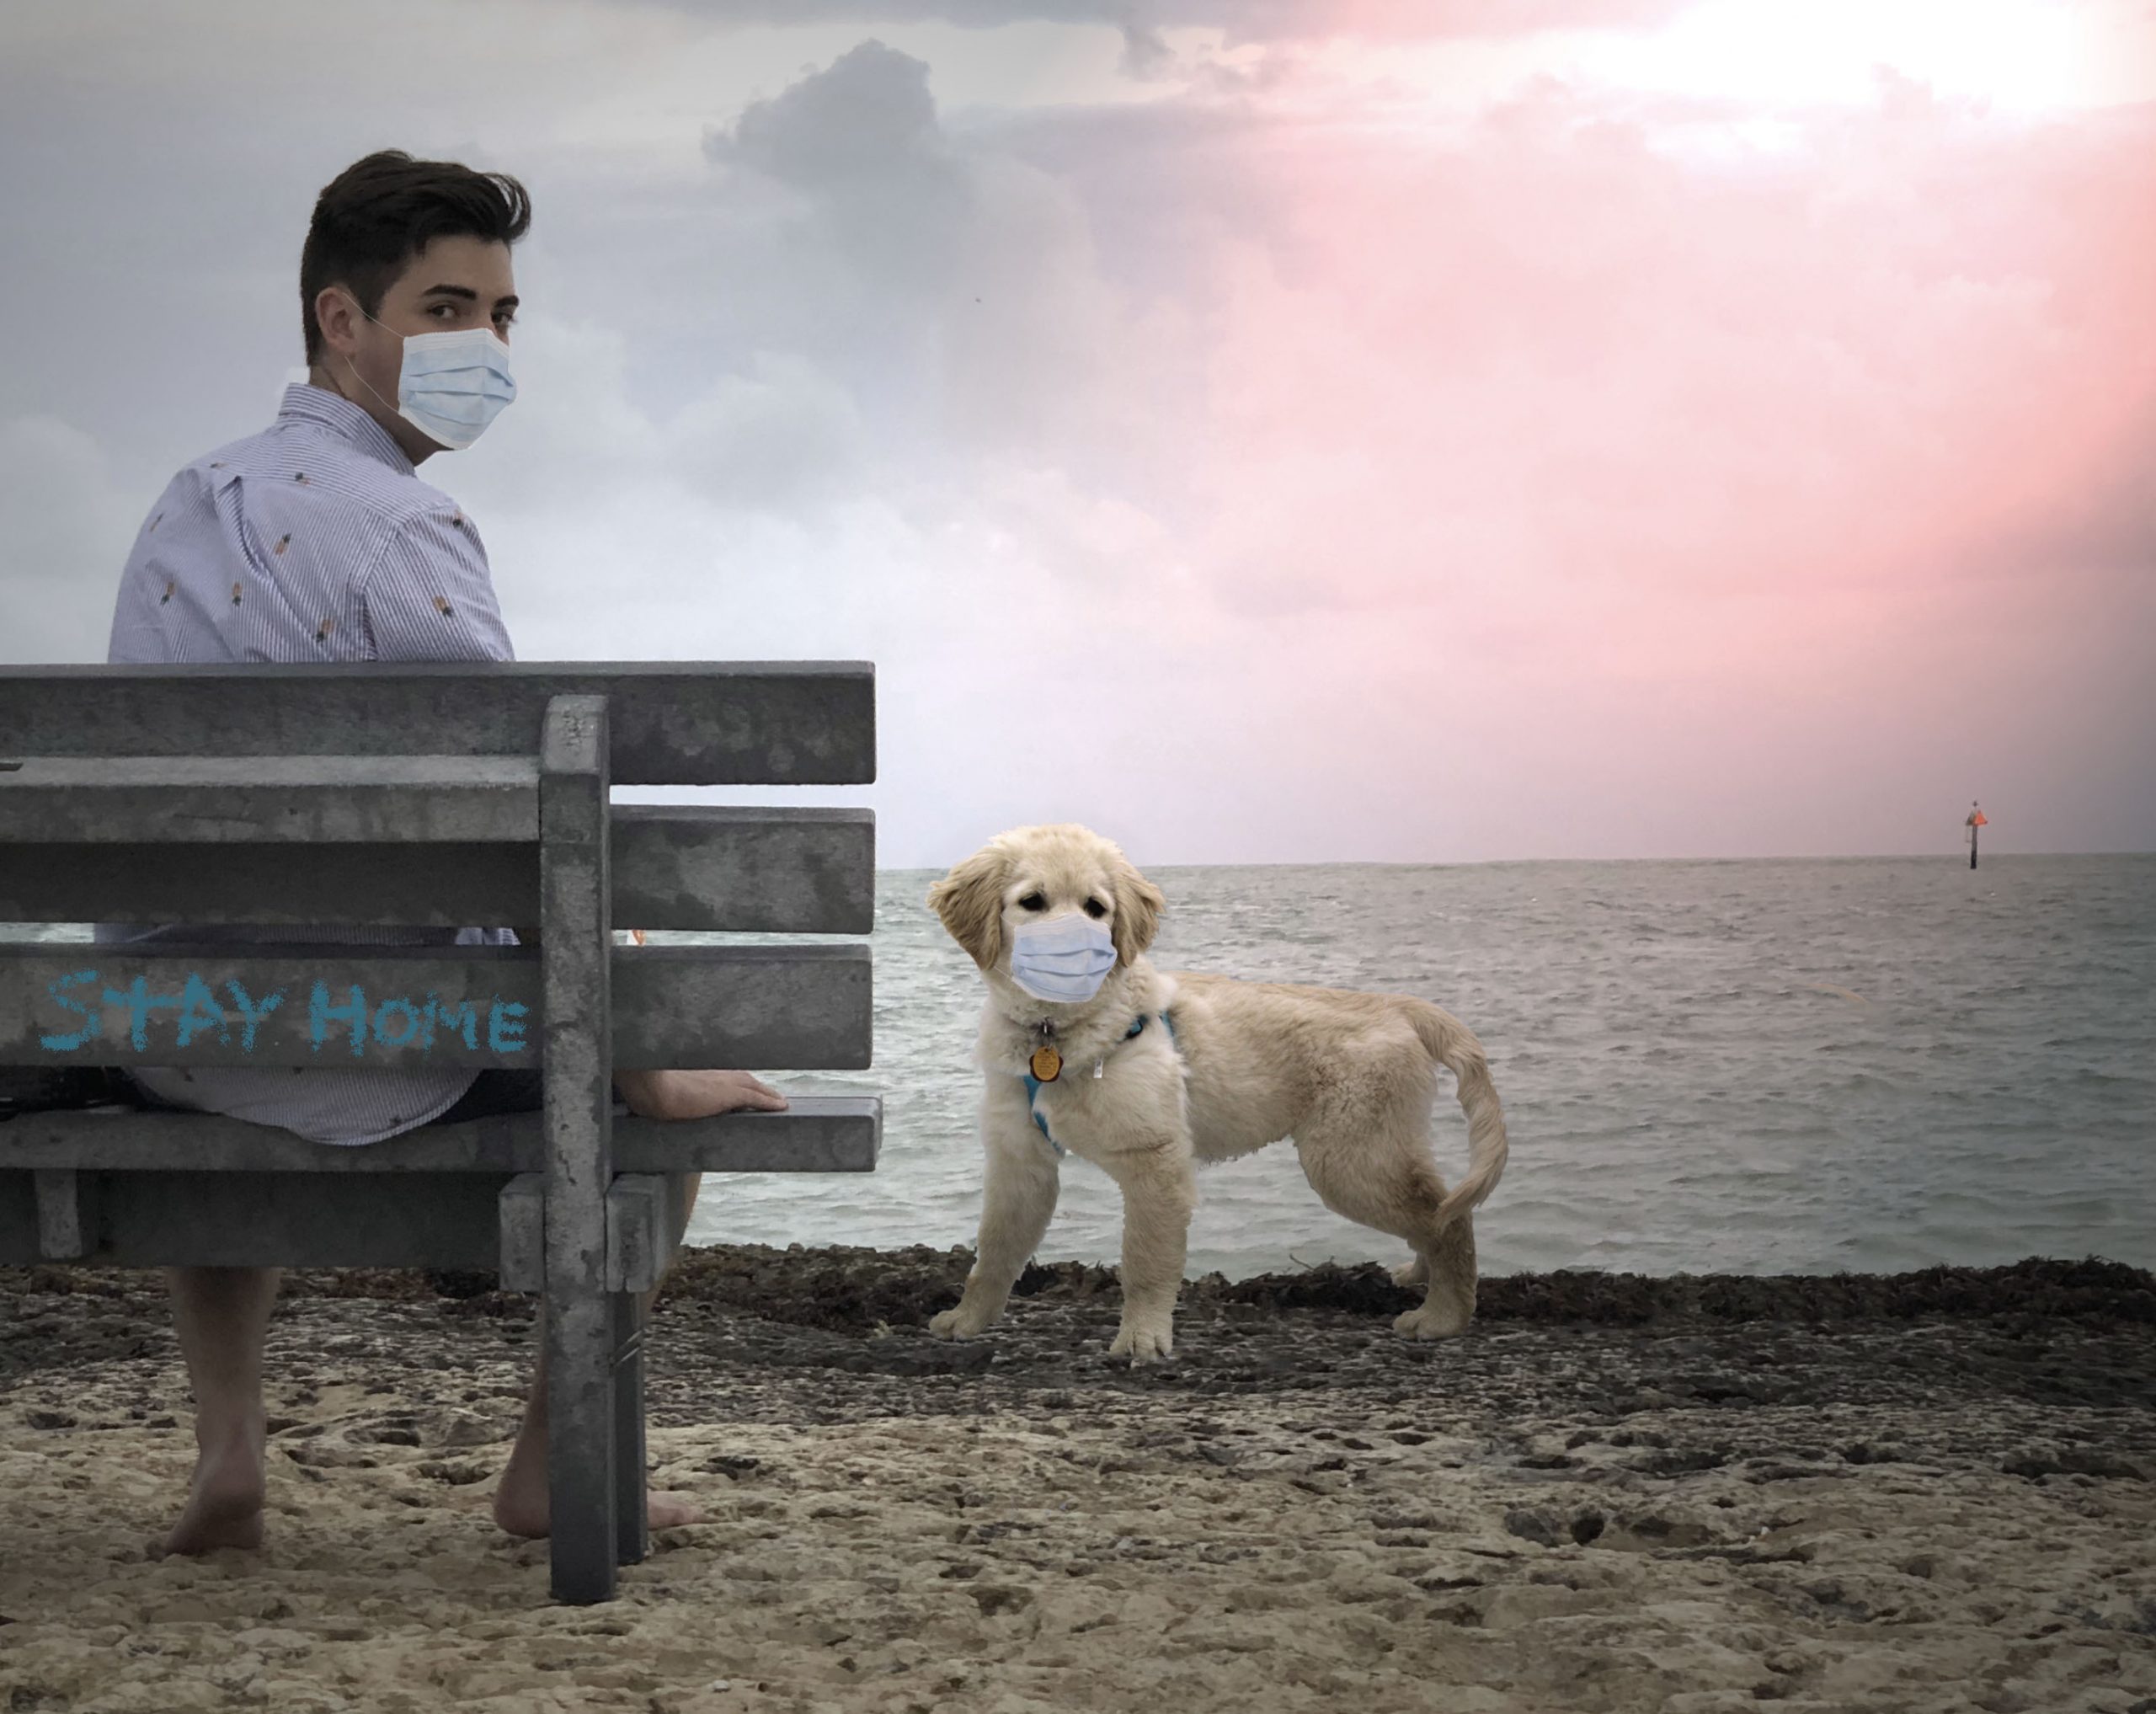 Man wearing COVID mask sitting on bench that reads "stay home"and dog wearing COVID mask are at the beach